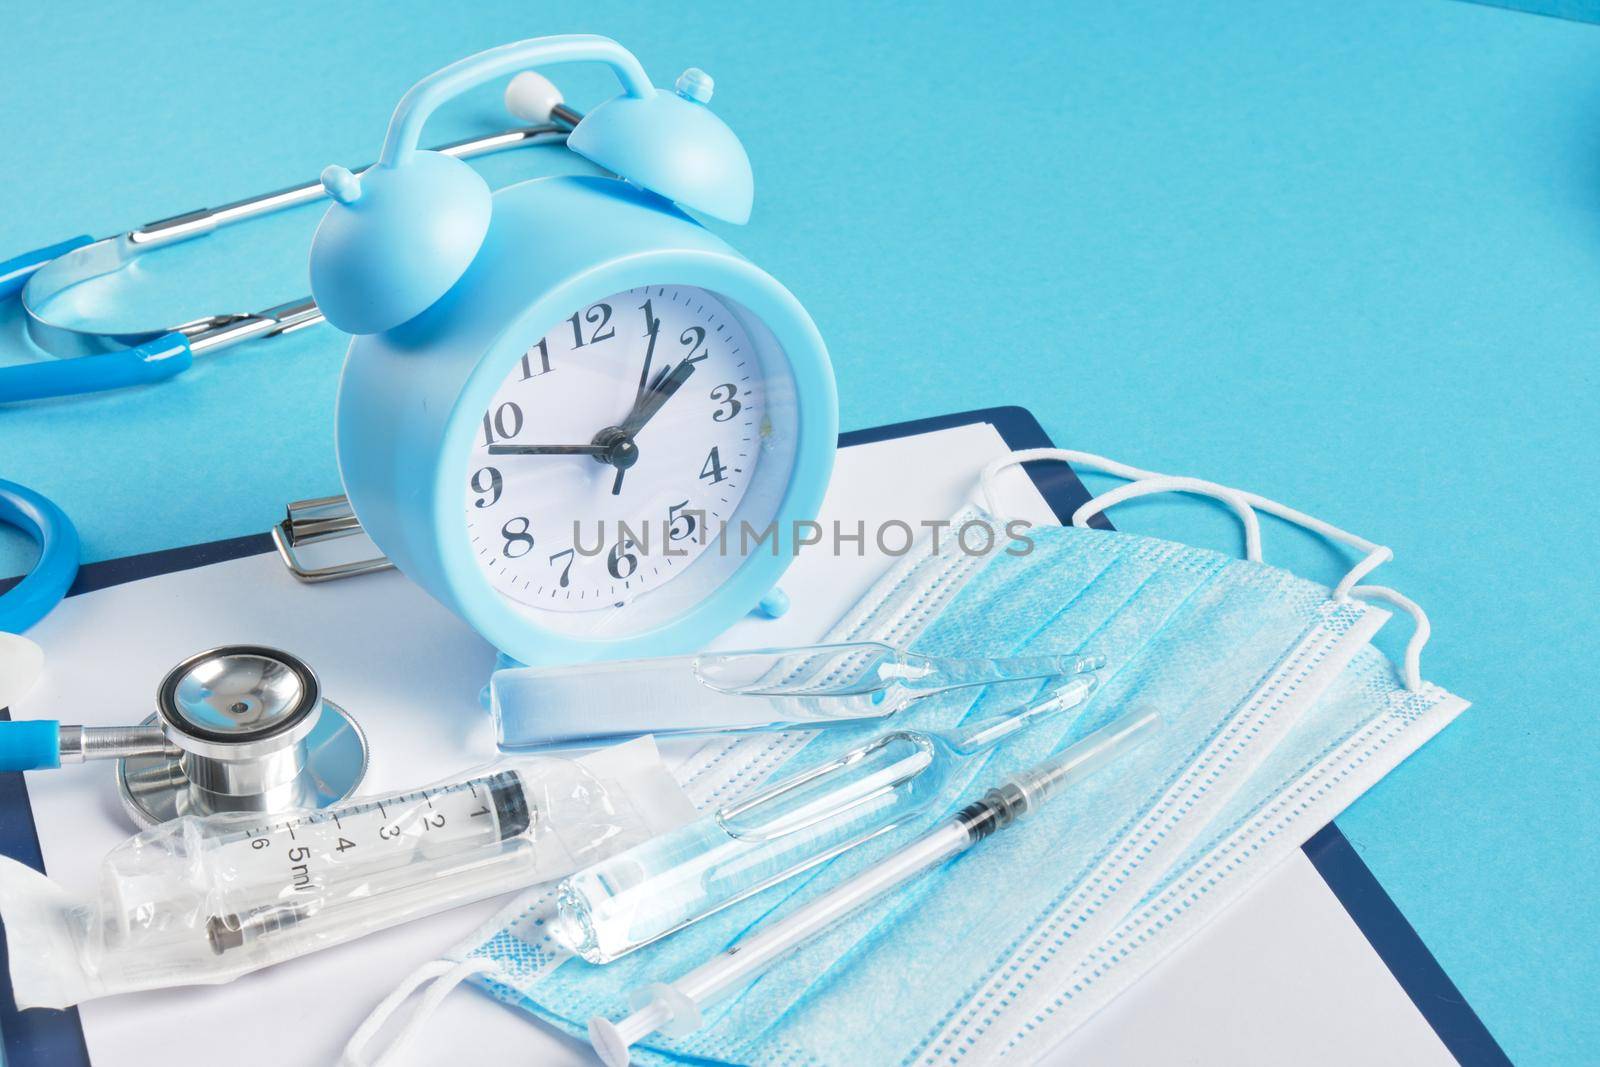 Alarm clock and medical equipment on blue background copy space top view stethoscope non-contact thermometer ampoule face mask syringe safety glasses